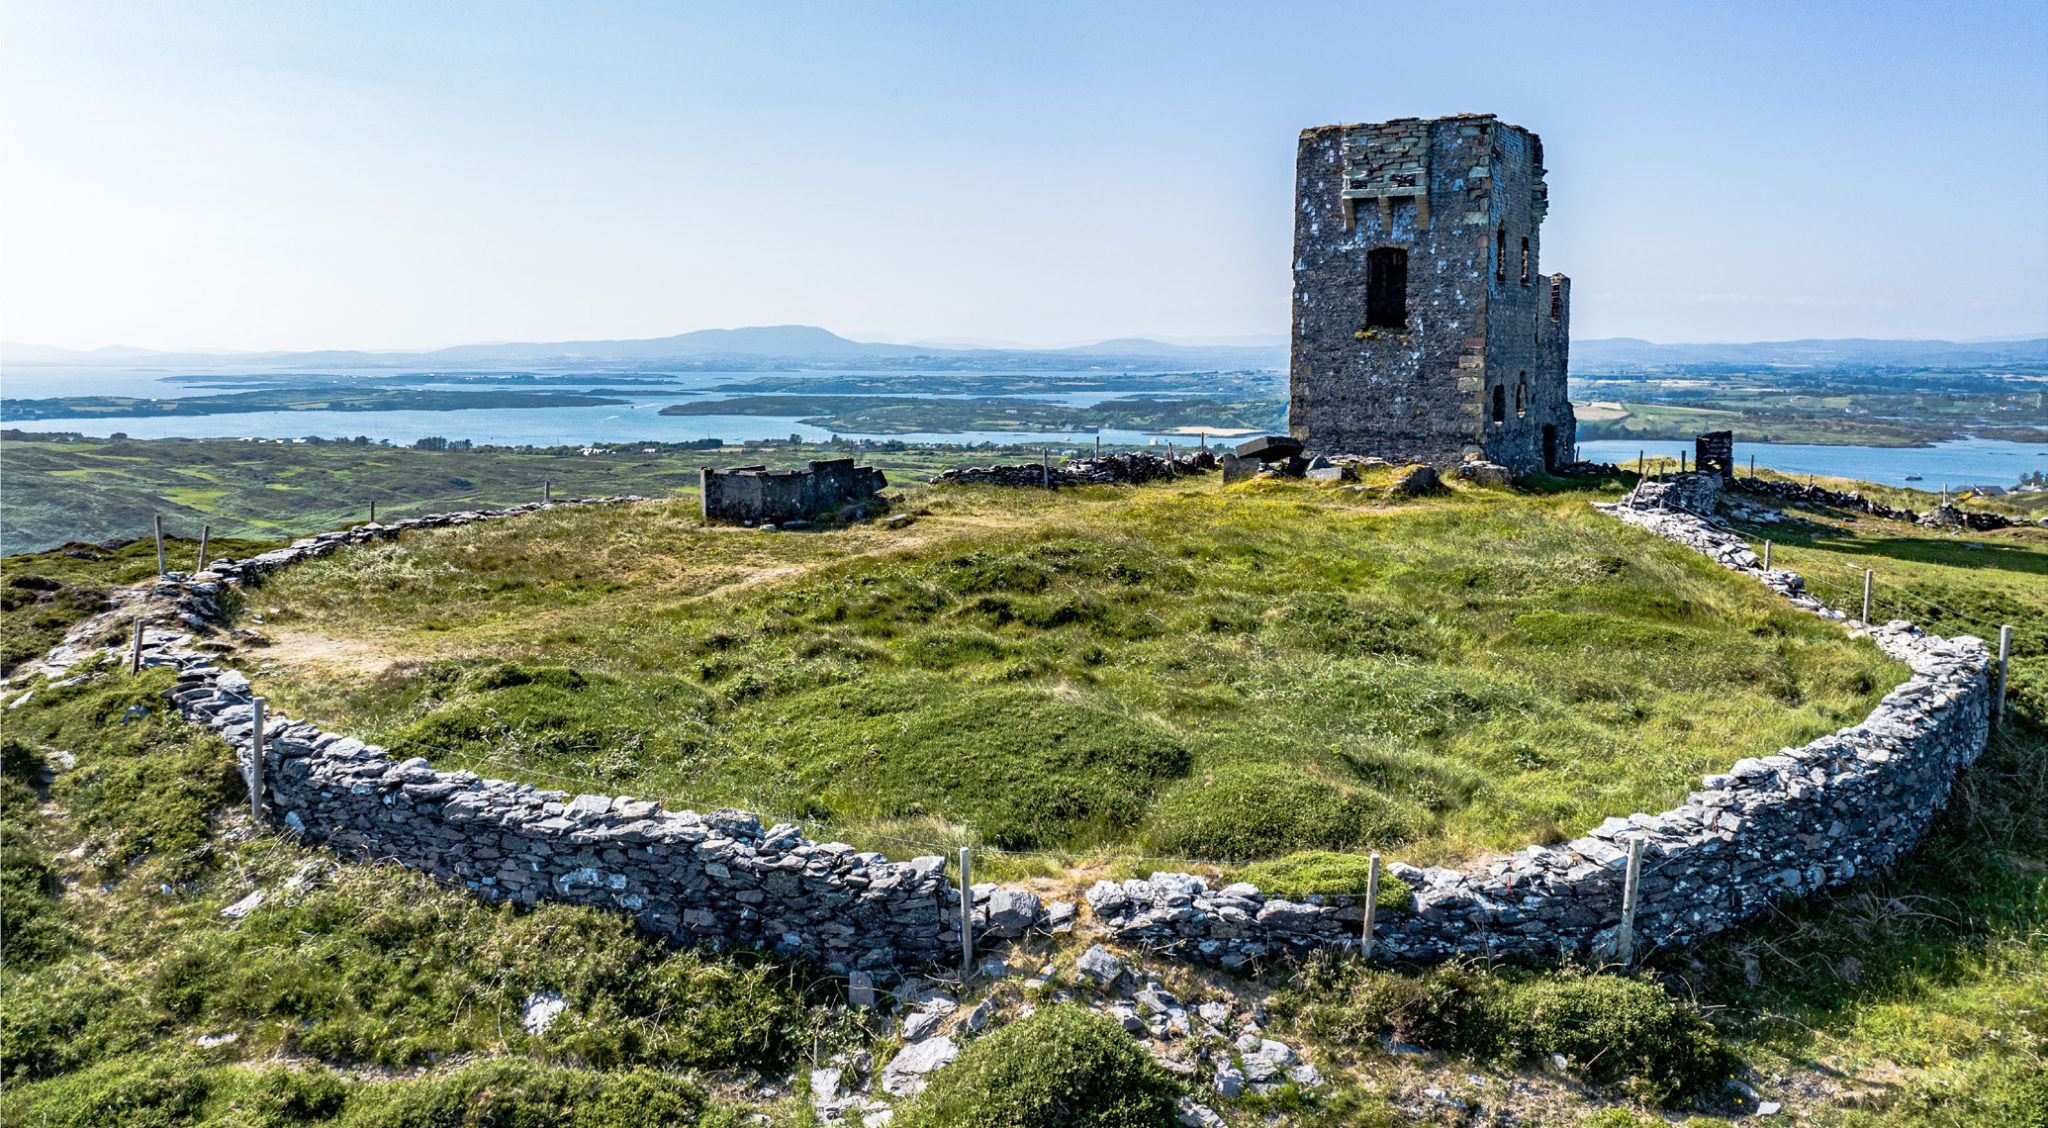 Spain Tower near Baltimore, with Roaringwater Bay and the Mizen peninsula in the background.